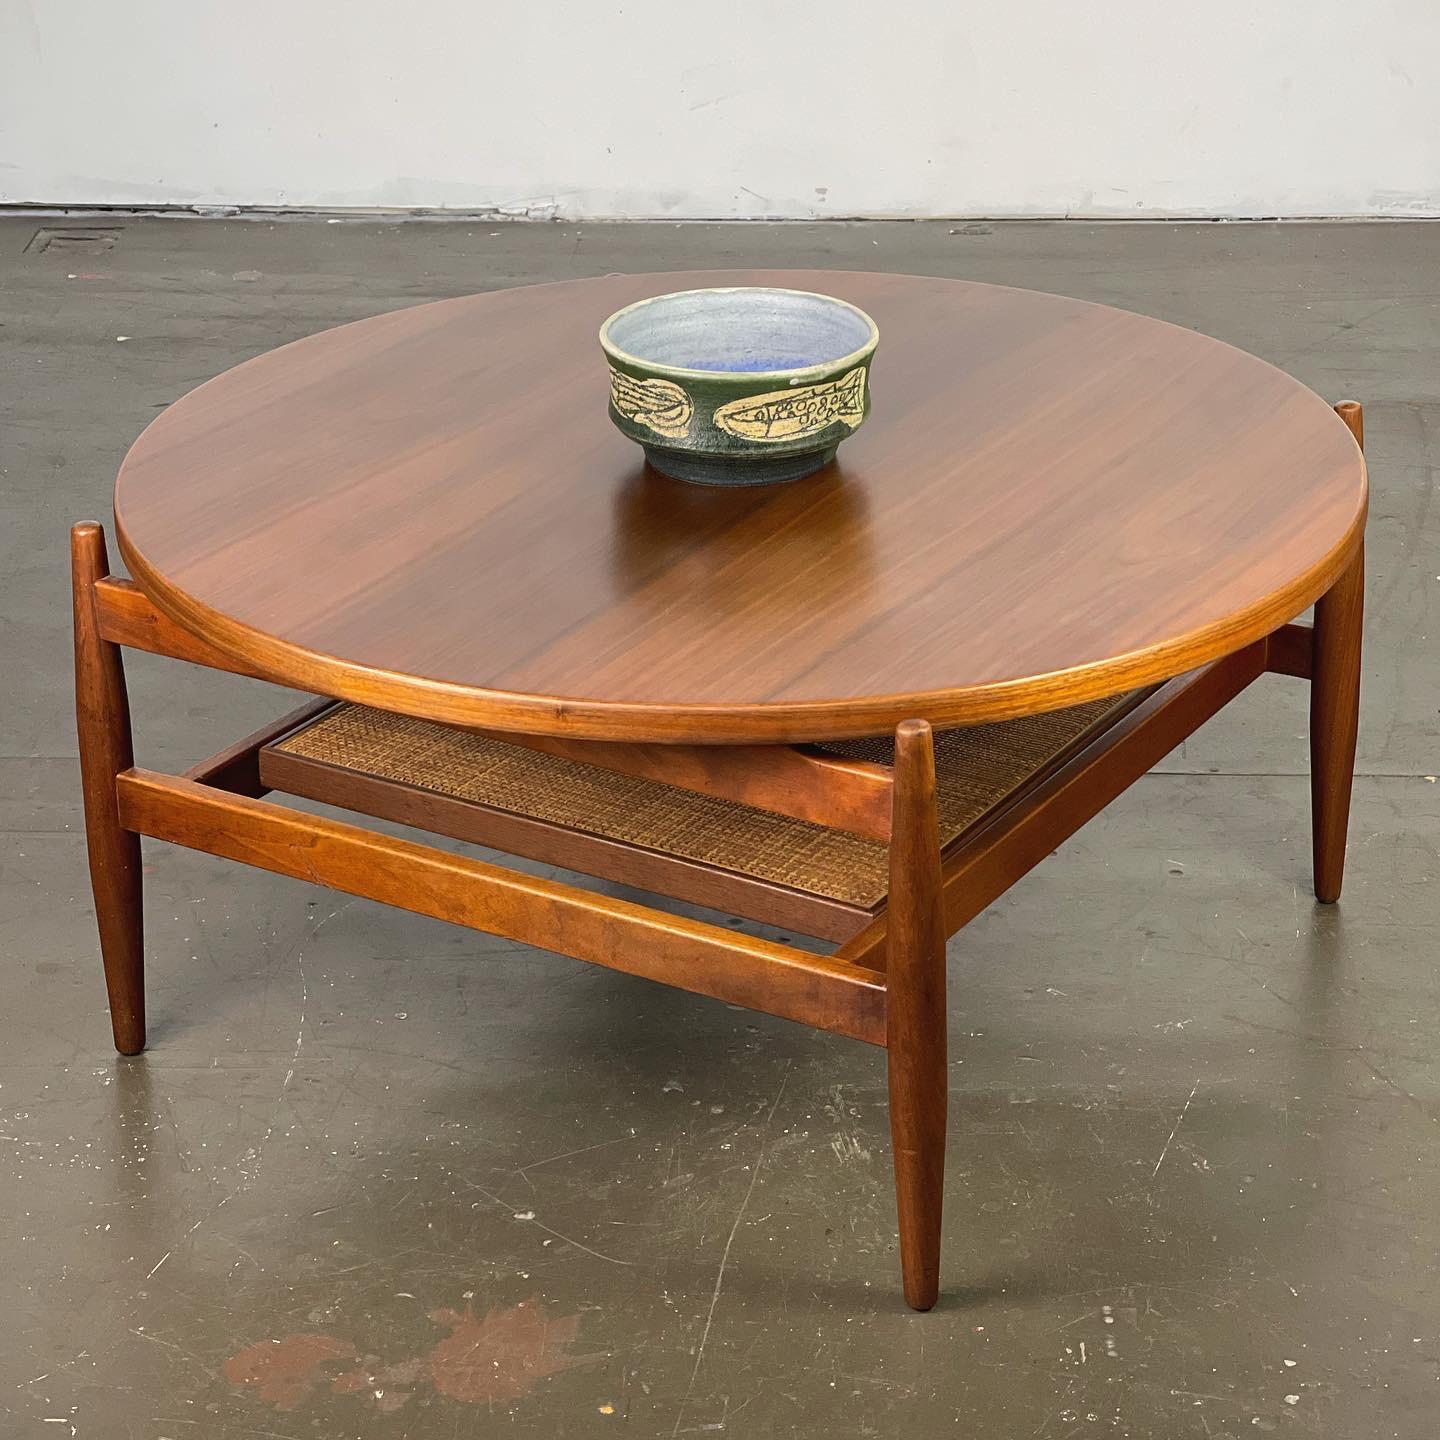 Highly detailed and scarce floating coffee table design by Jens Risom; 1960's. Made of walnut with a cane shelf. 
Restored. 36